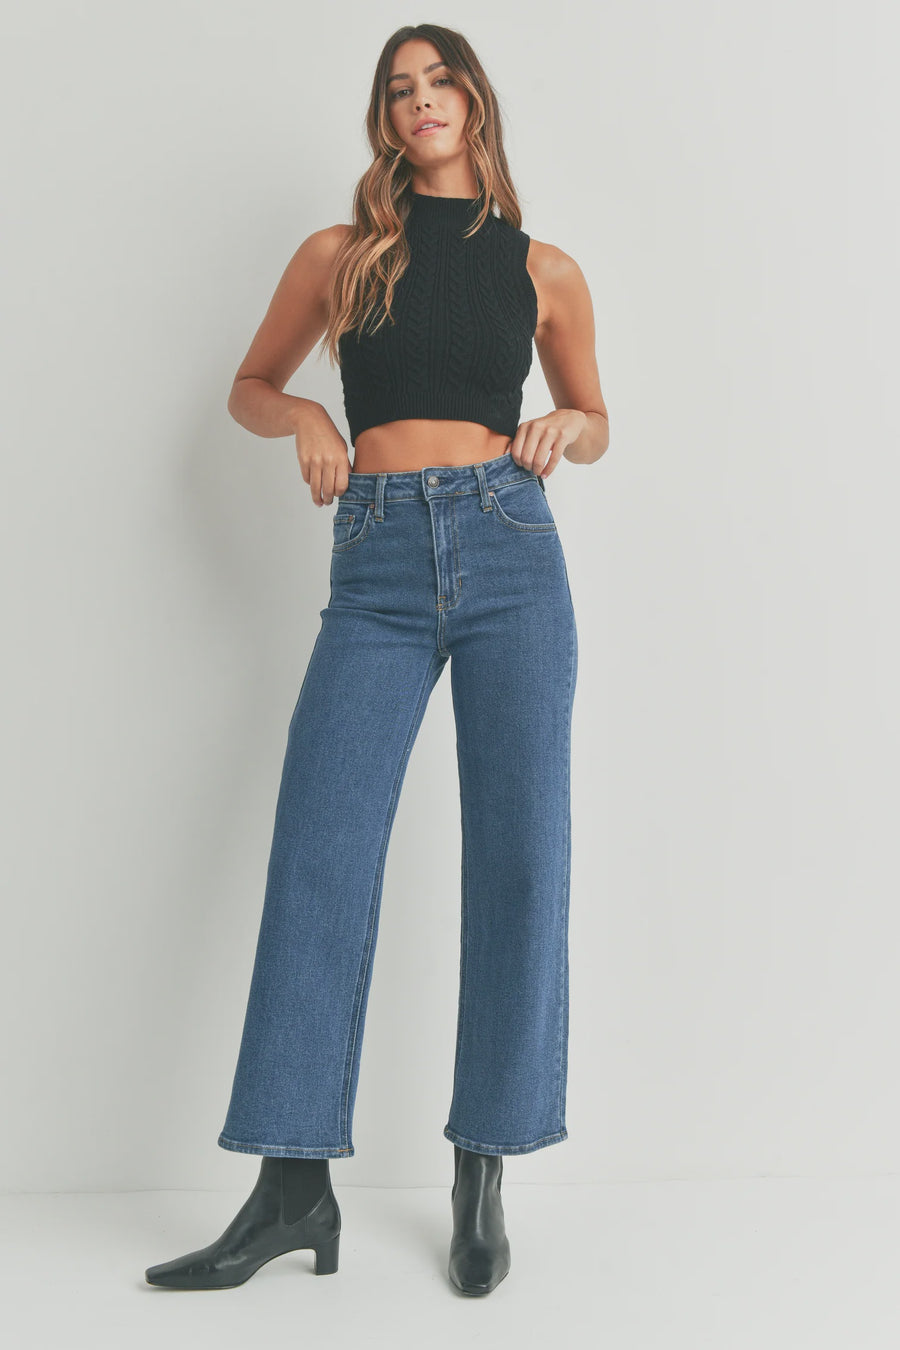 The Uncut Straight Jeans by Just Black Denim